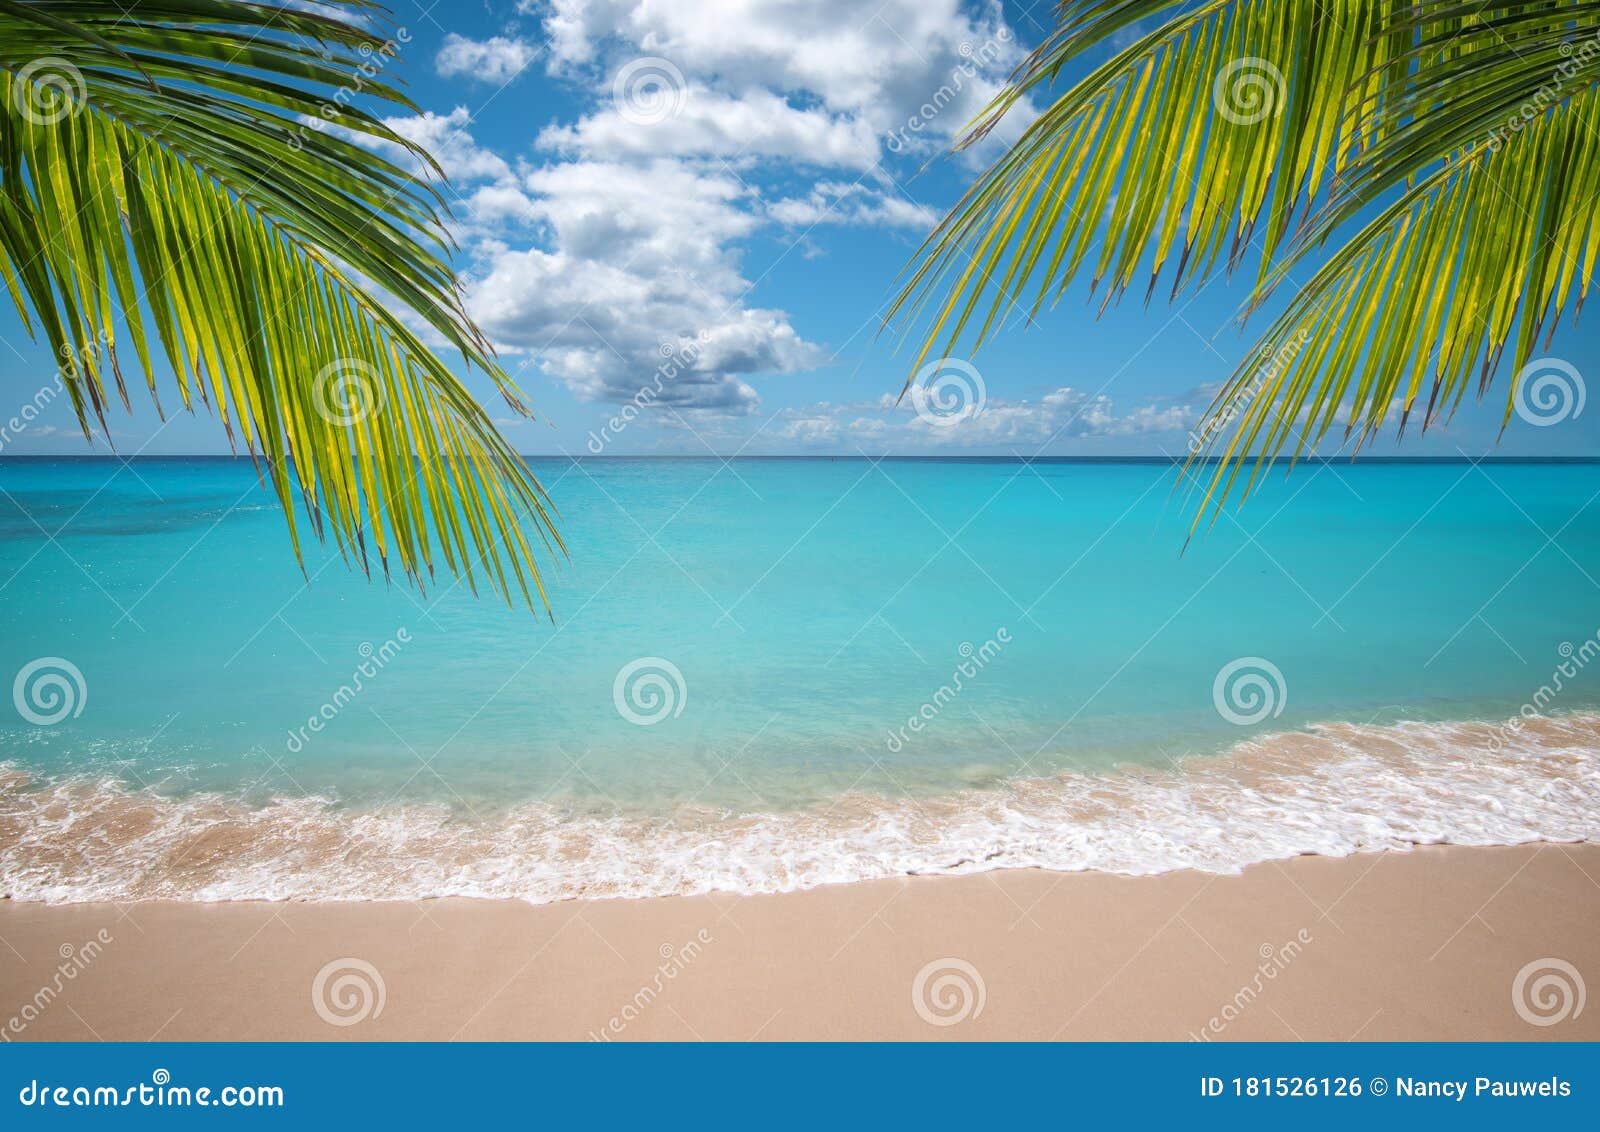 tropical vacation paradise with white sandy beaches and swaying palm trees.